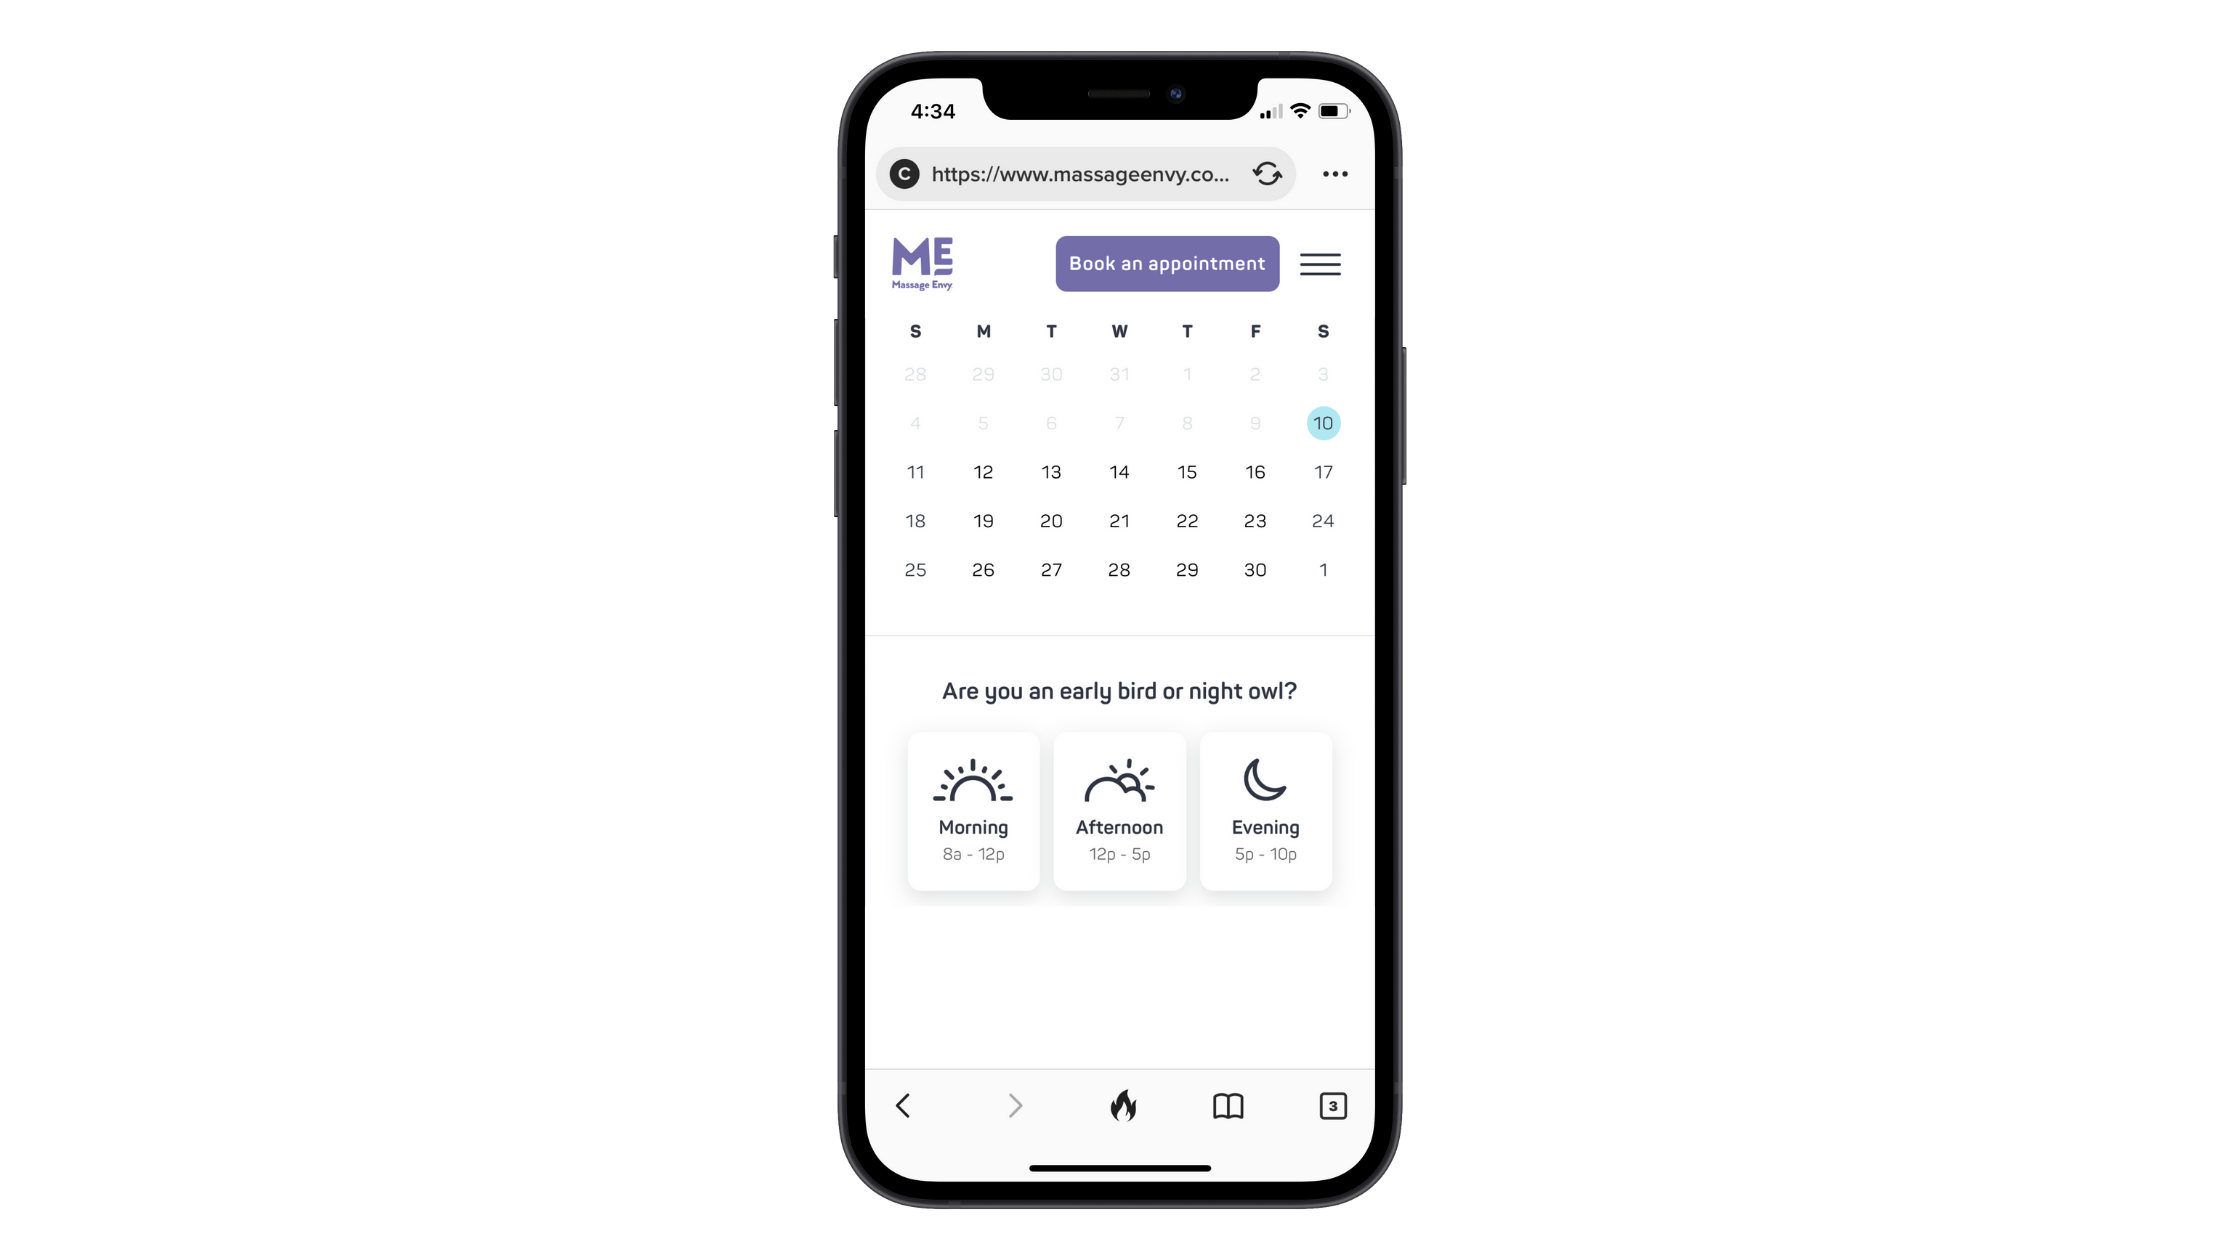 Massage Envy customers can find available days and times using the calendar booking system. An option to narrow down results by Morning 8a - 12p, Afternoon 12p - 5p, or Evening 5p - 10p is also available.